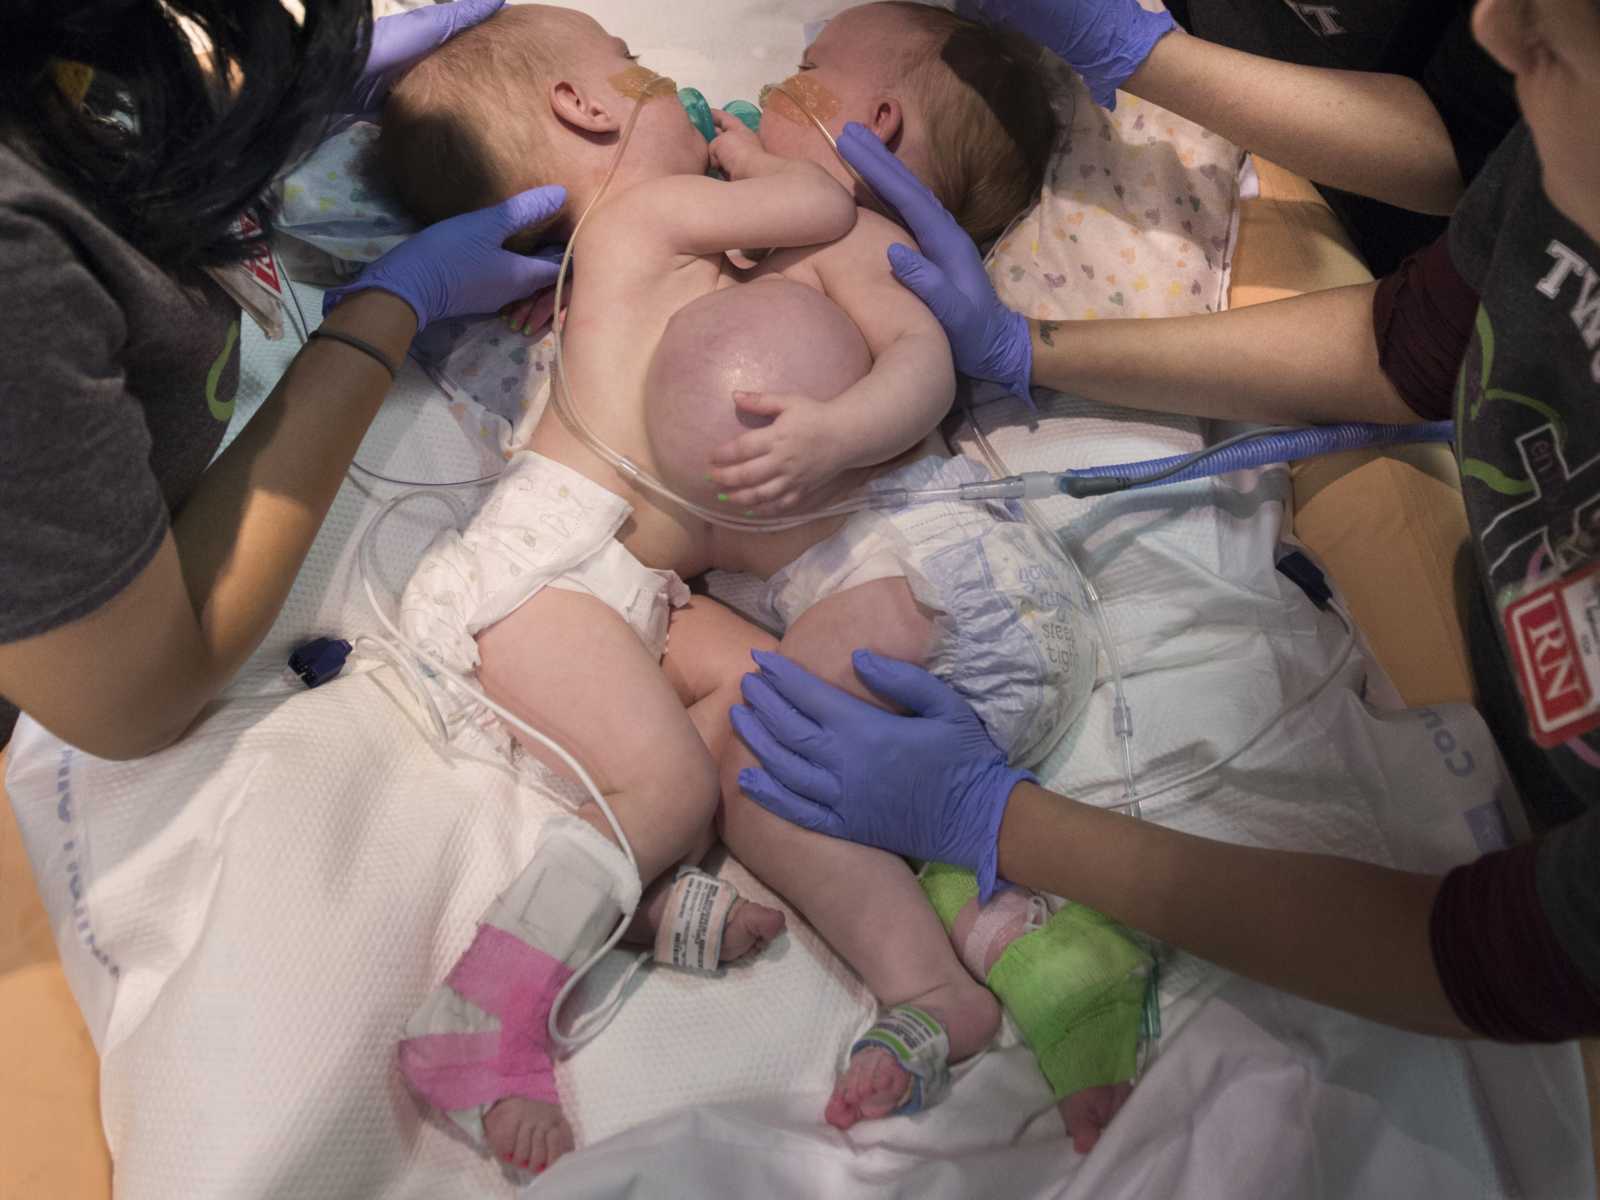 aerial view of conjoined twins in hospital bed with people touching them with blue latex gloves on